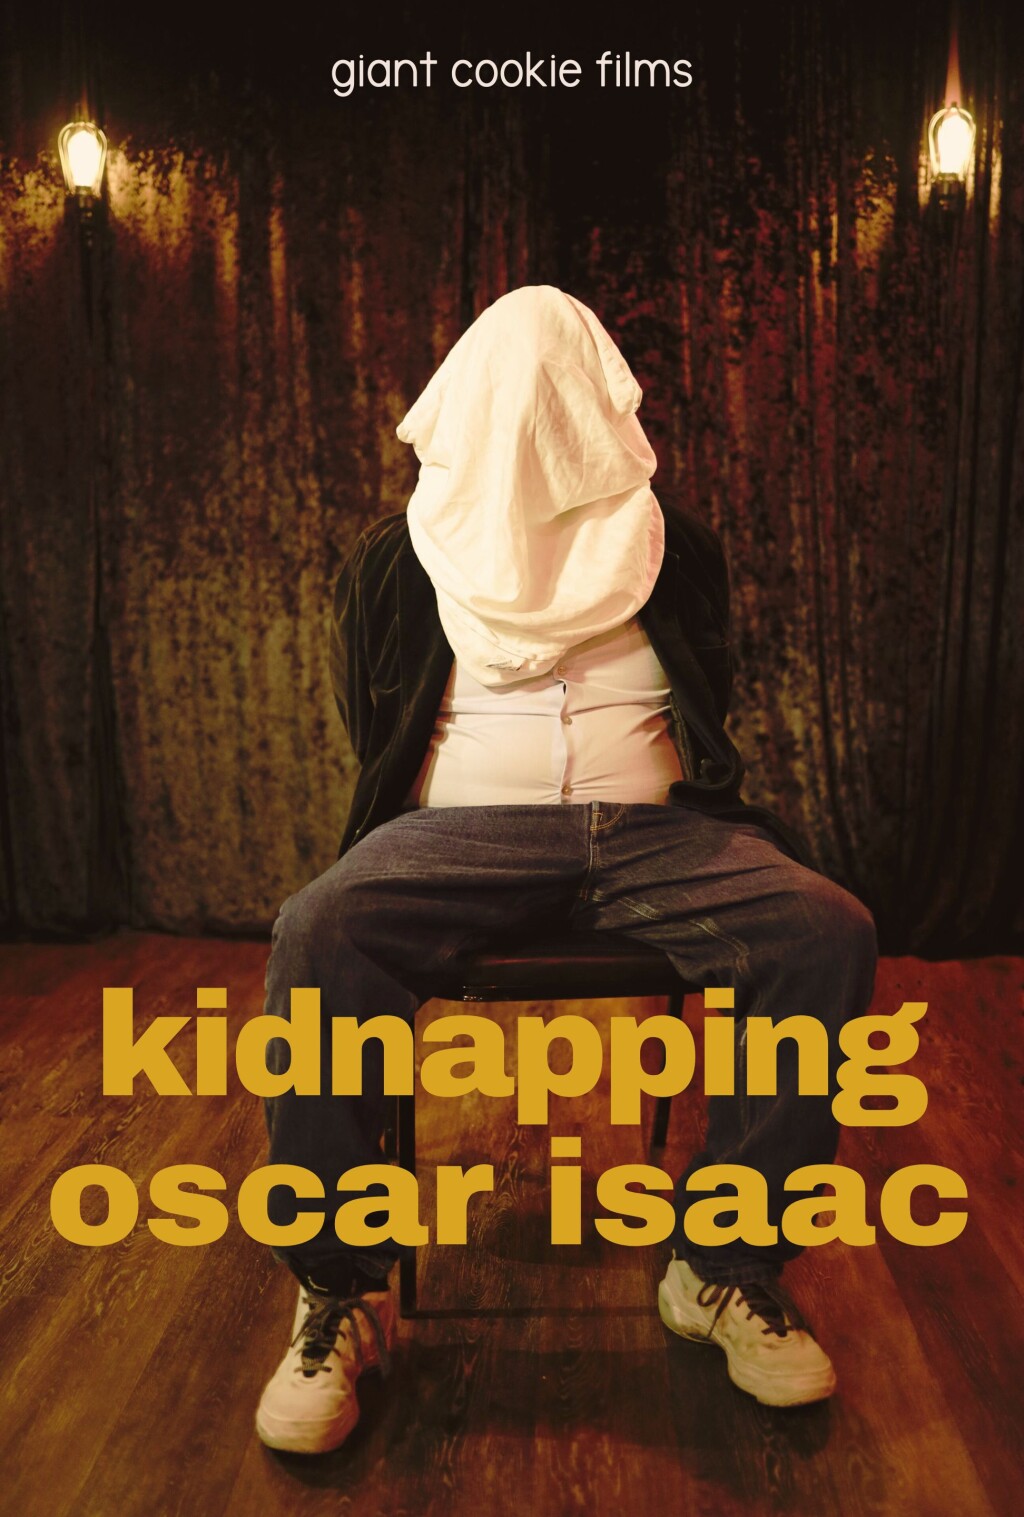 Filmposter for Kidnapping Oscar Isaac